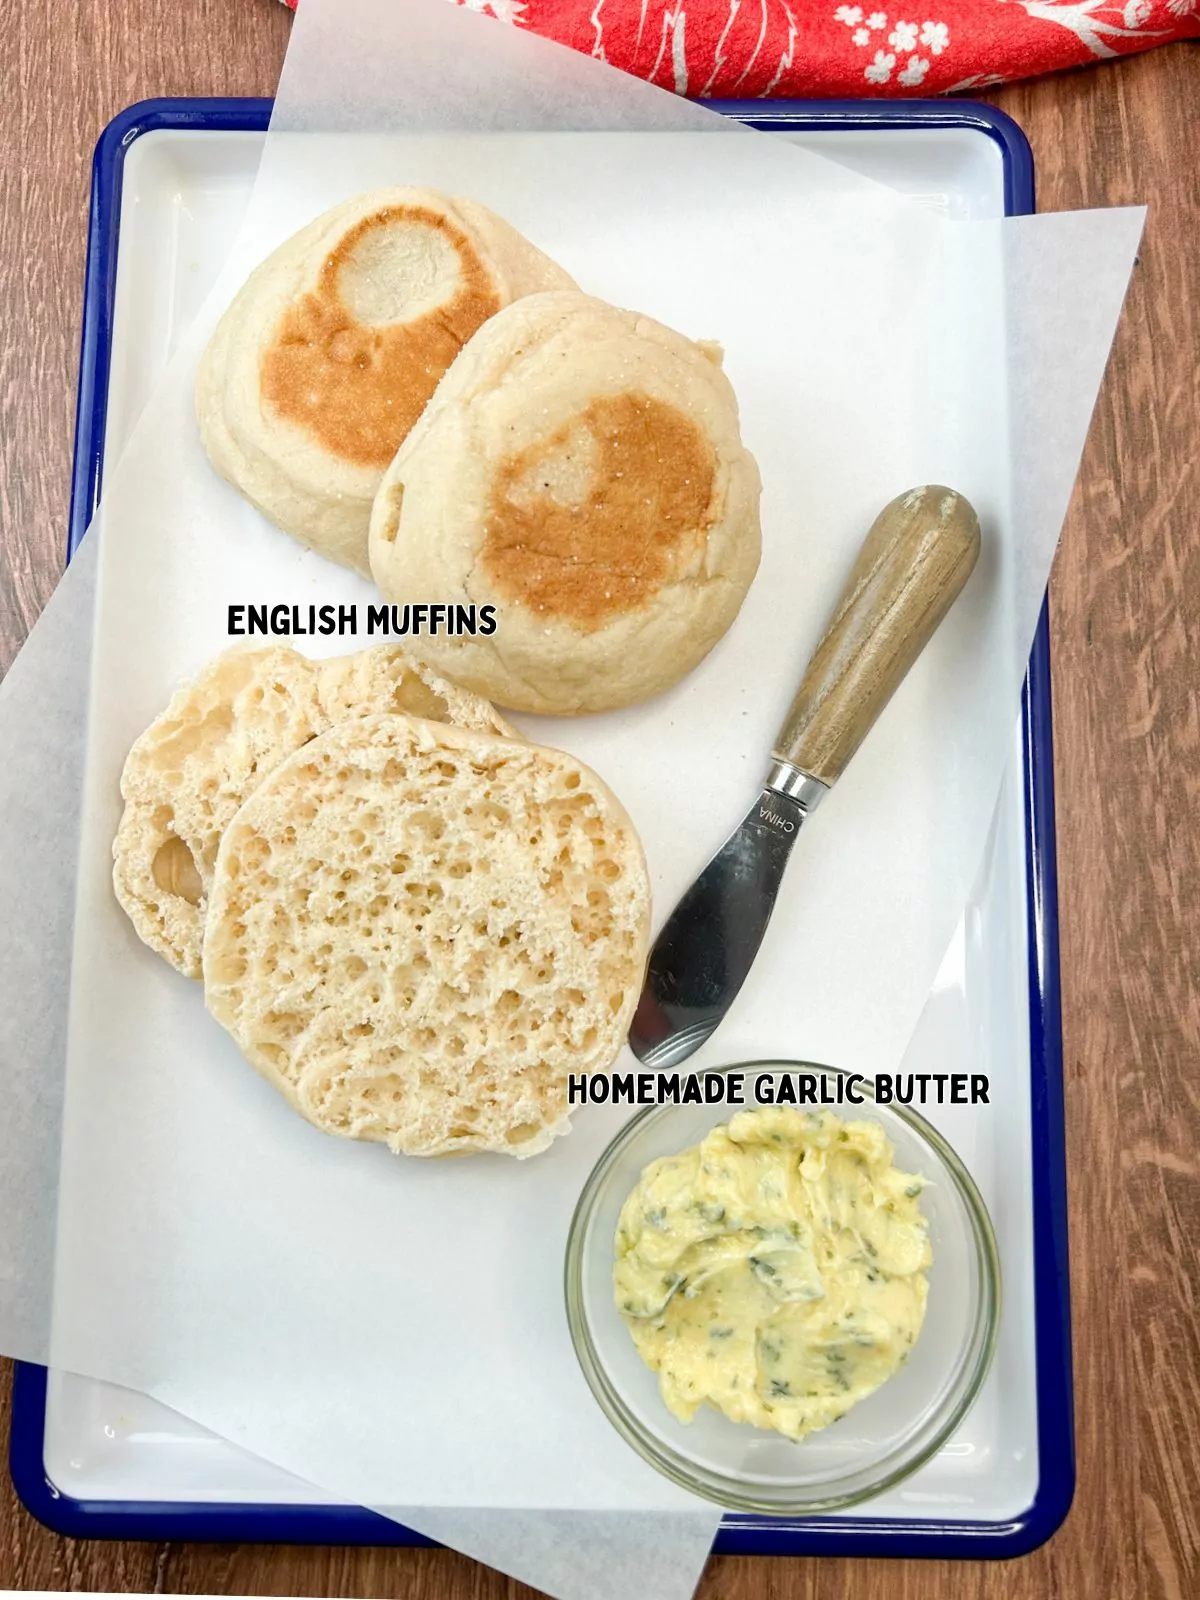 Ingredients for Garlic Butter with English muffins.